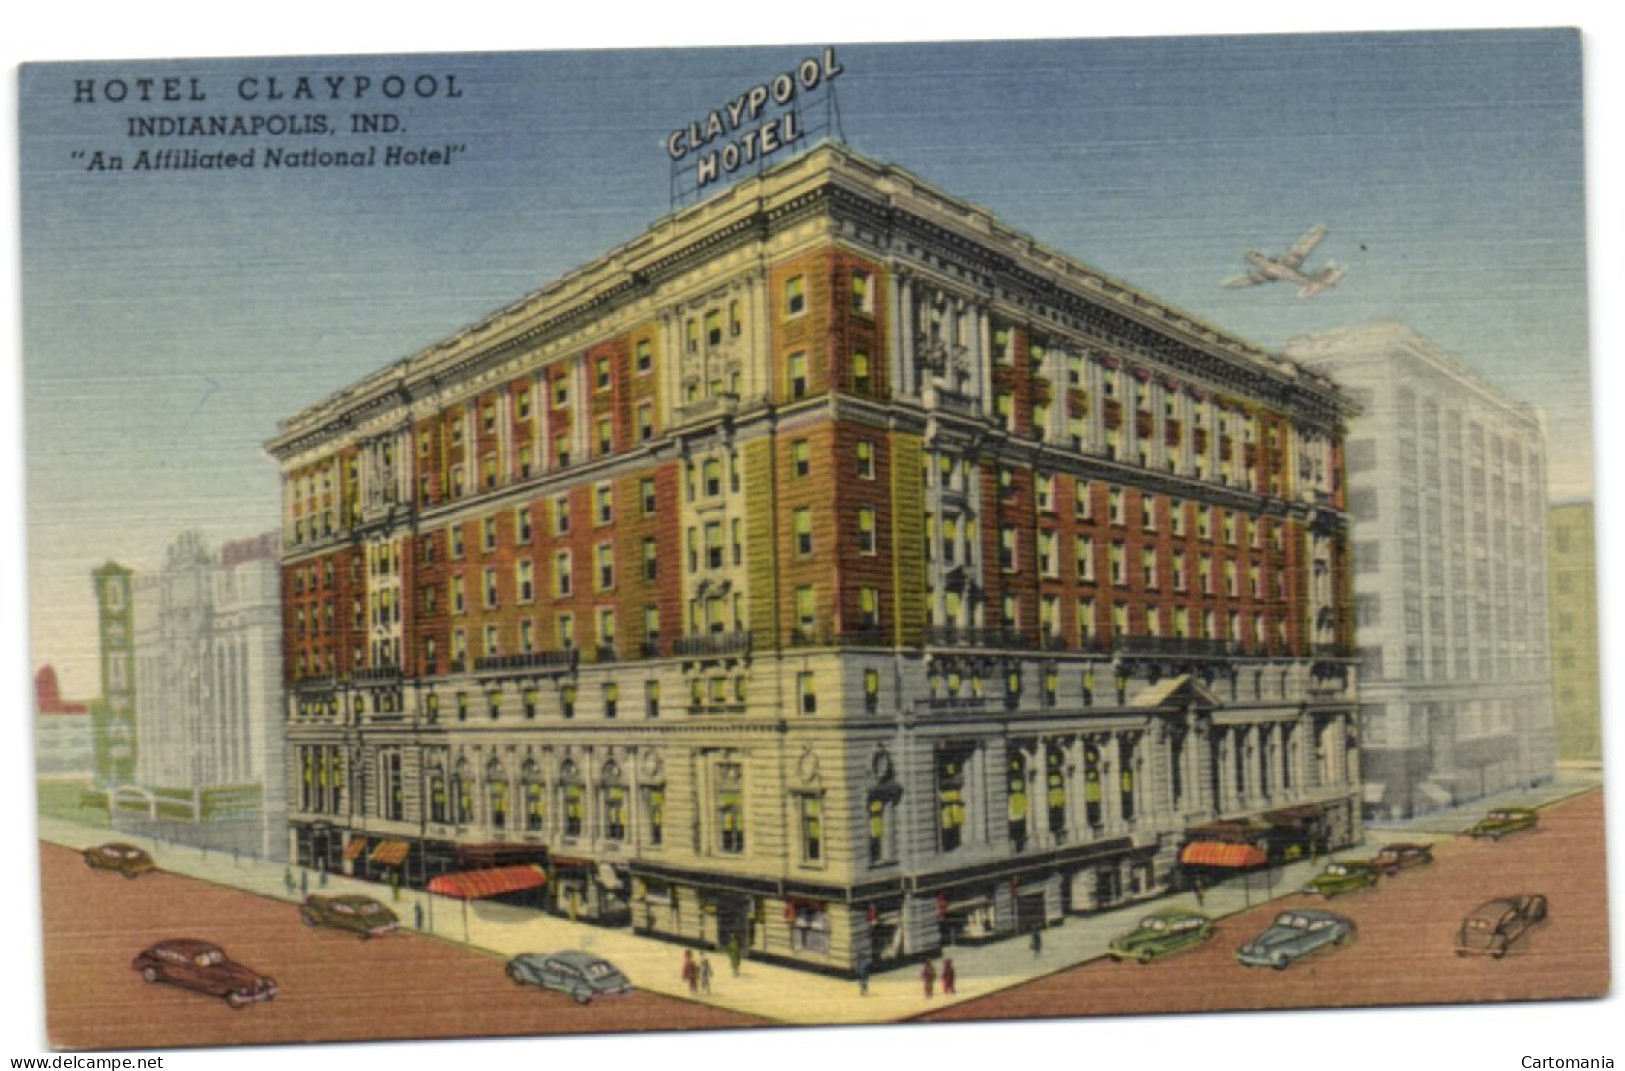 Hotel Claypool - Indianapolis - IND. - An Affiliated National Hotel - Indianapolis